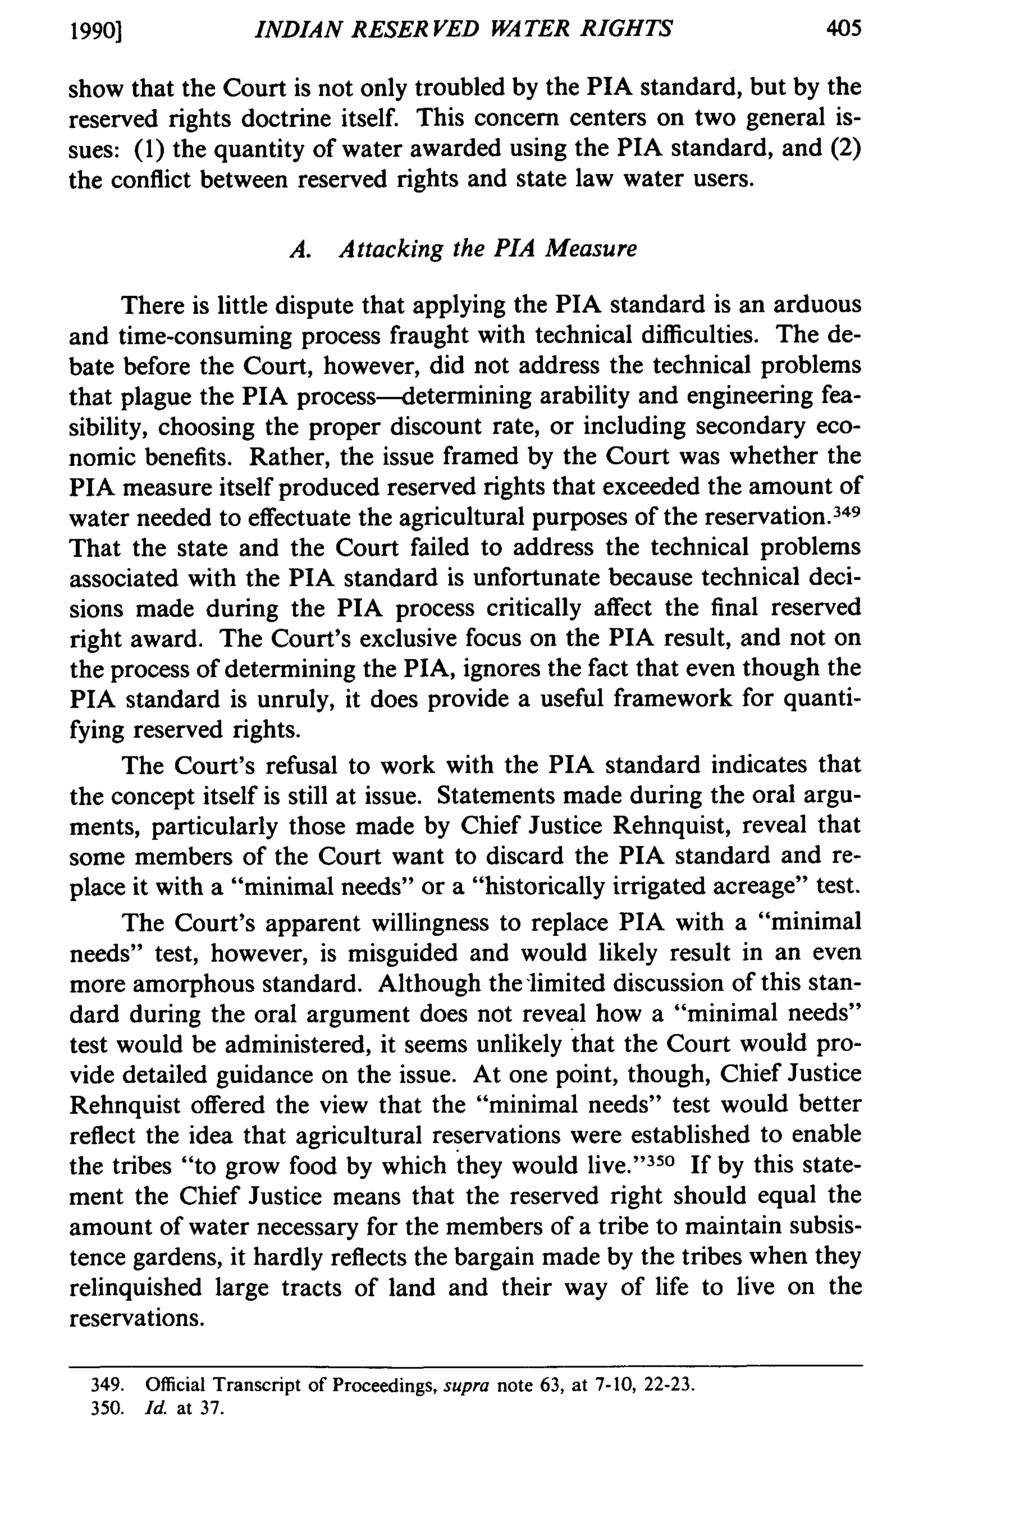 1990] INDIAN RESERVED WATER RIGHTS show that the Court is not only troubled by the PIA standard, but by the reserved rights doctrine itself.